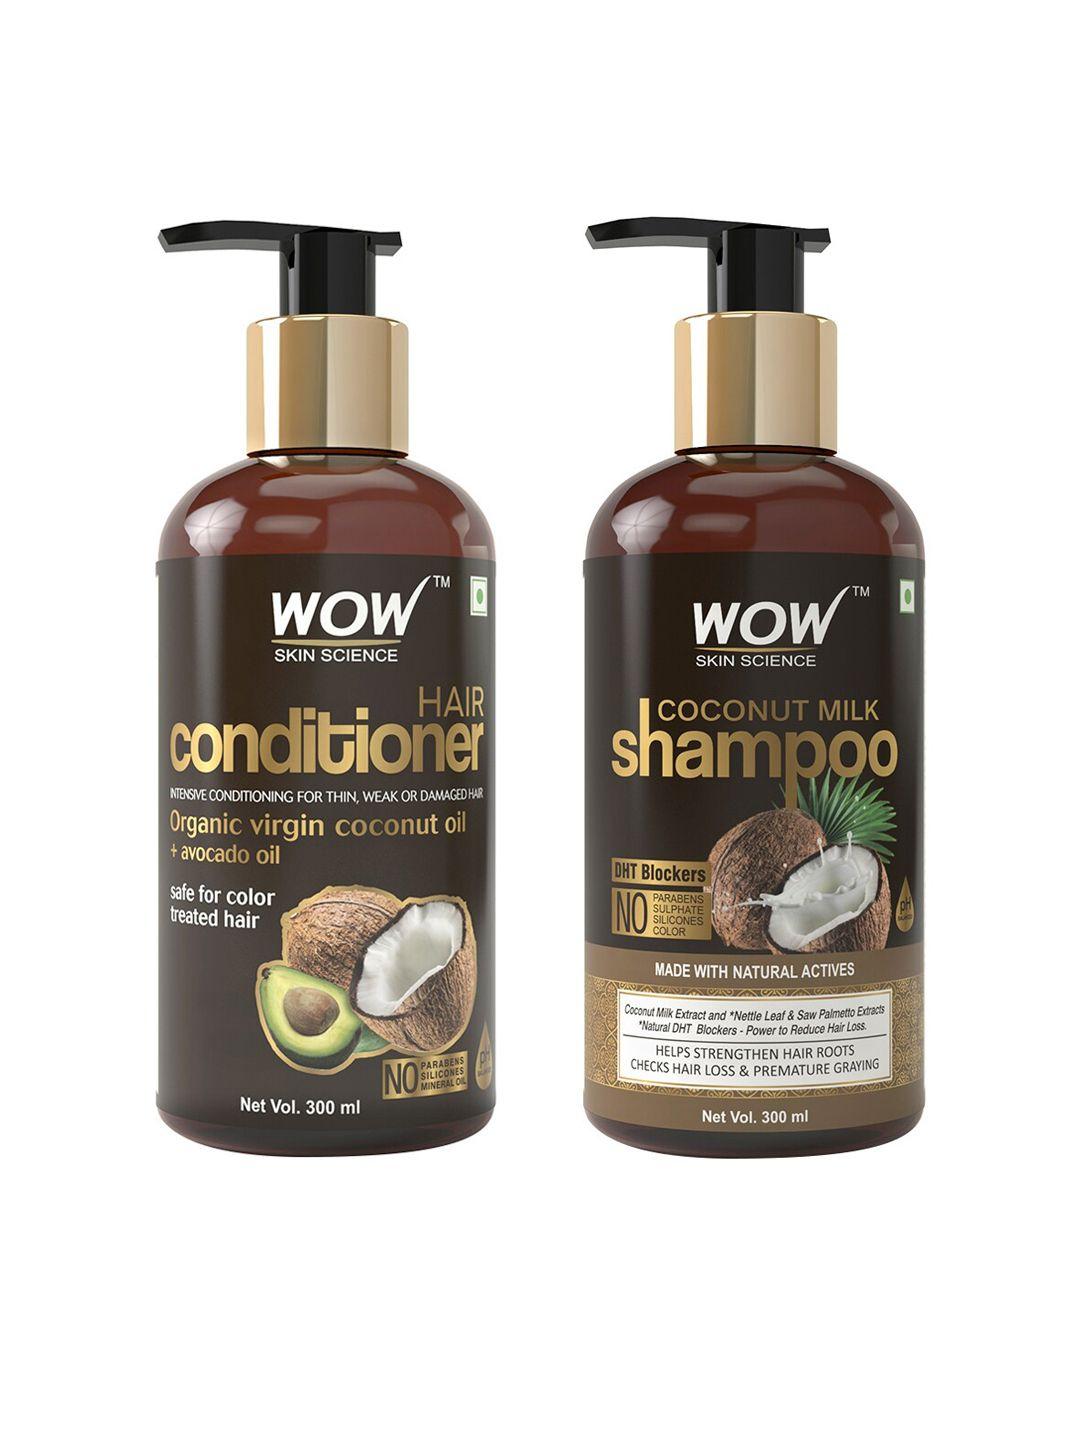 wow skin science set of shampoo & conditioner